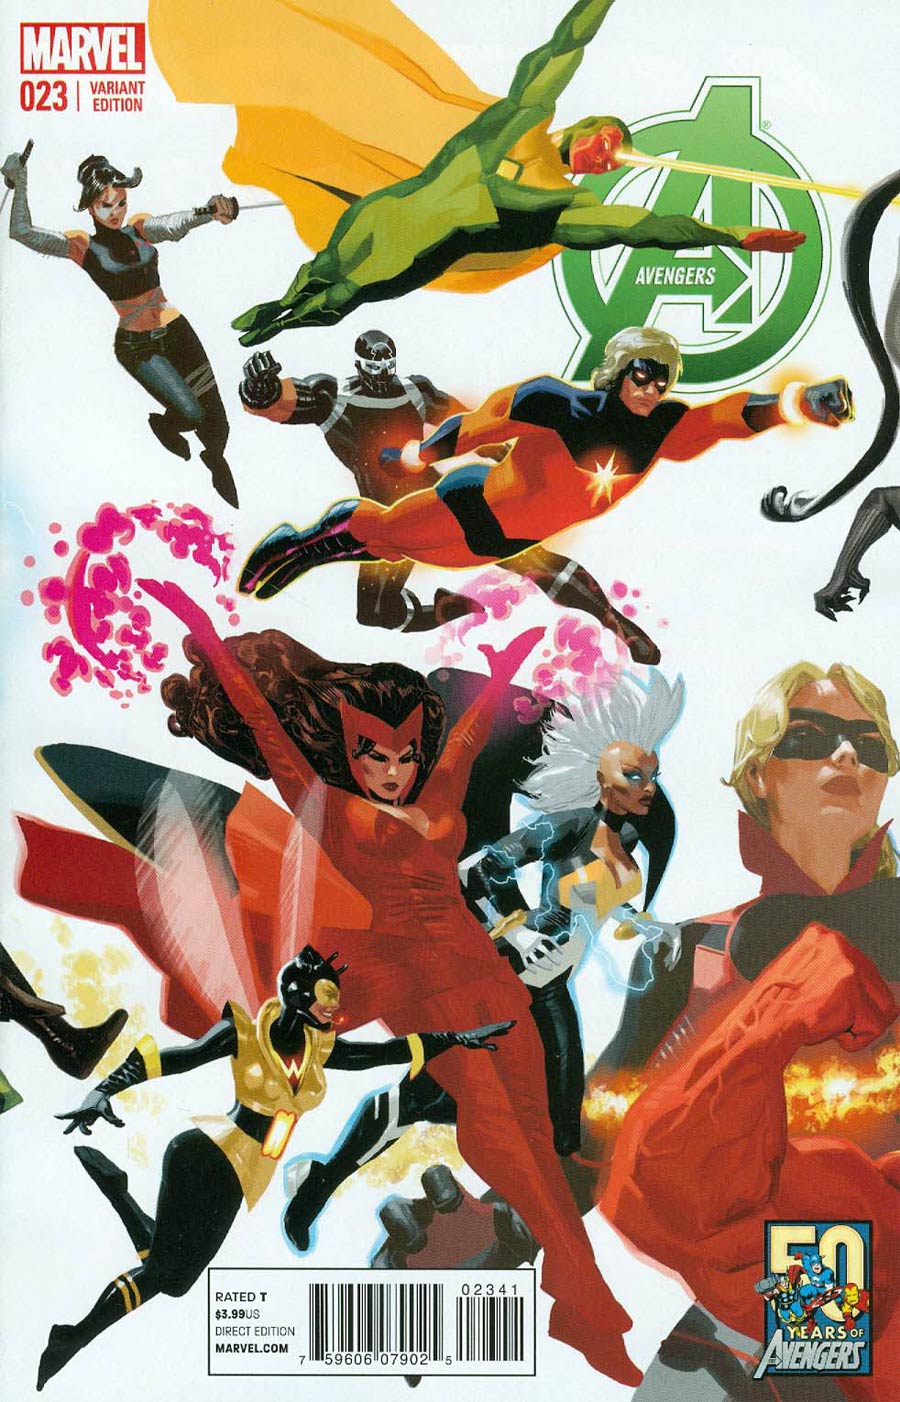 Avengers Vol 5 #23 Cover B Variant Daniel Acuna Avengers 50th Anniversary Cover (Infinity Tie-In)